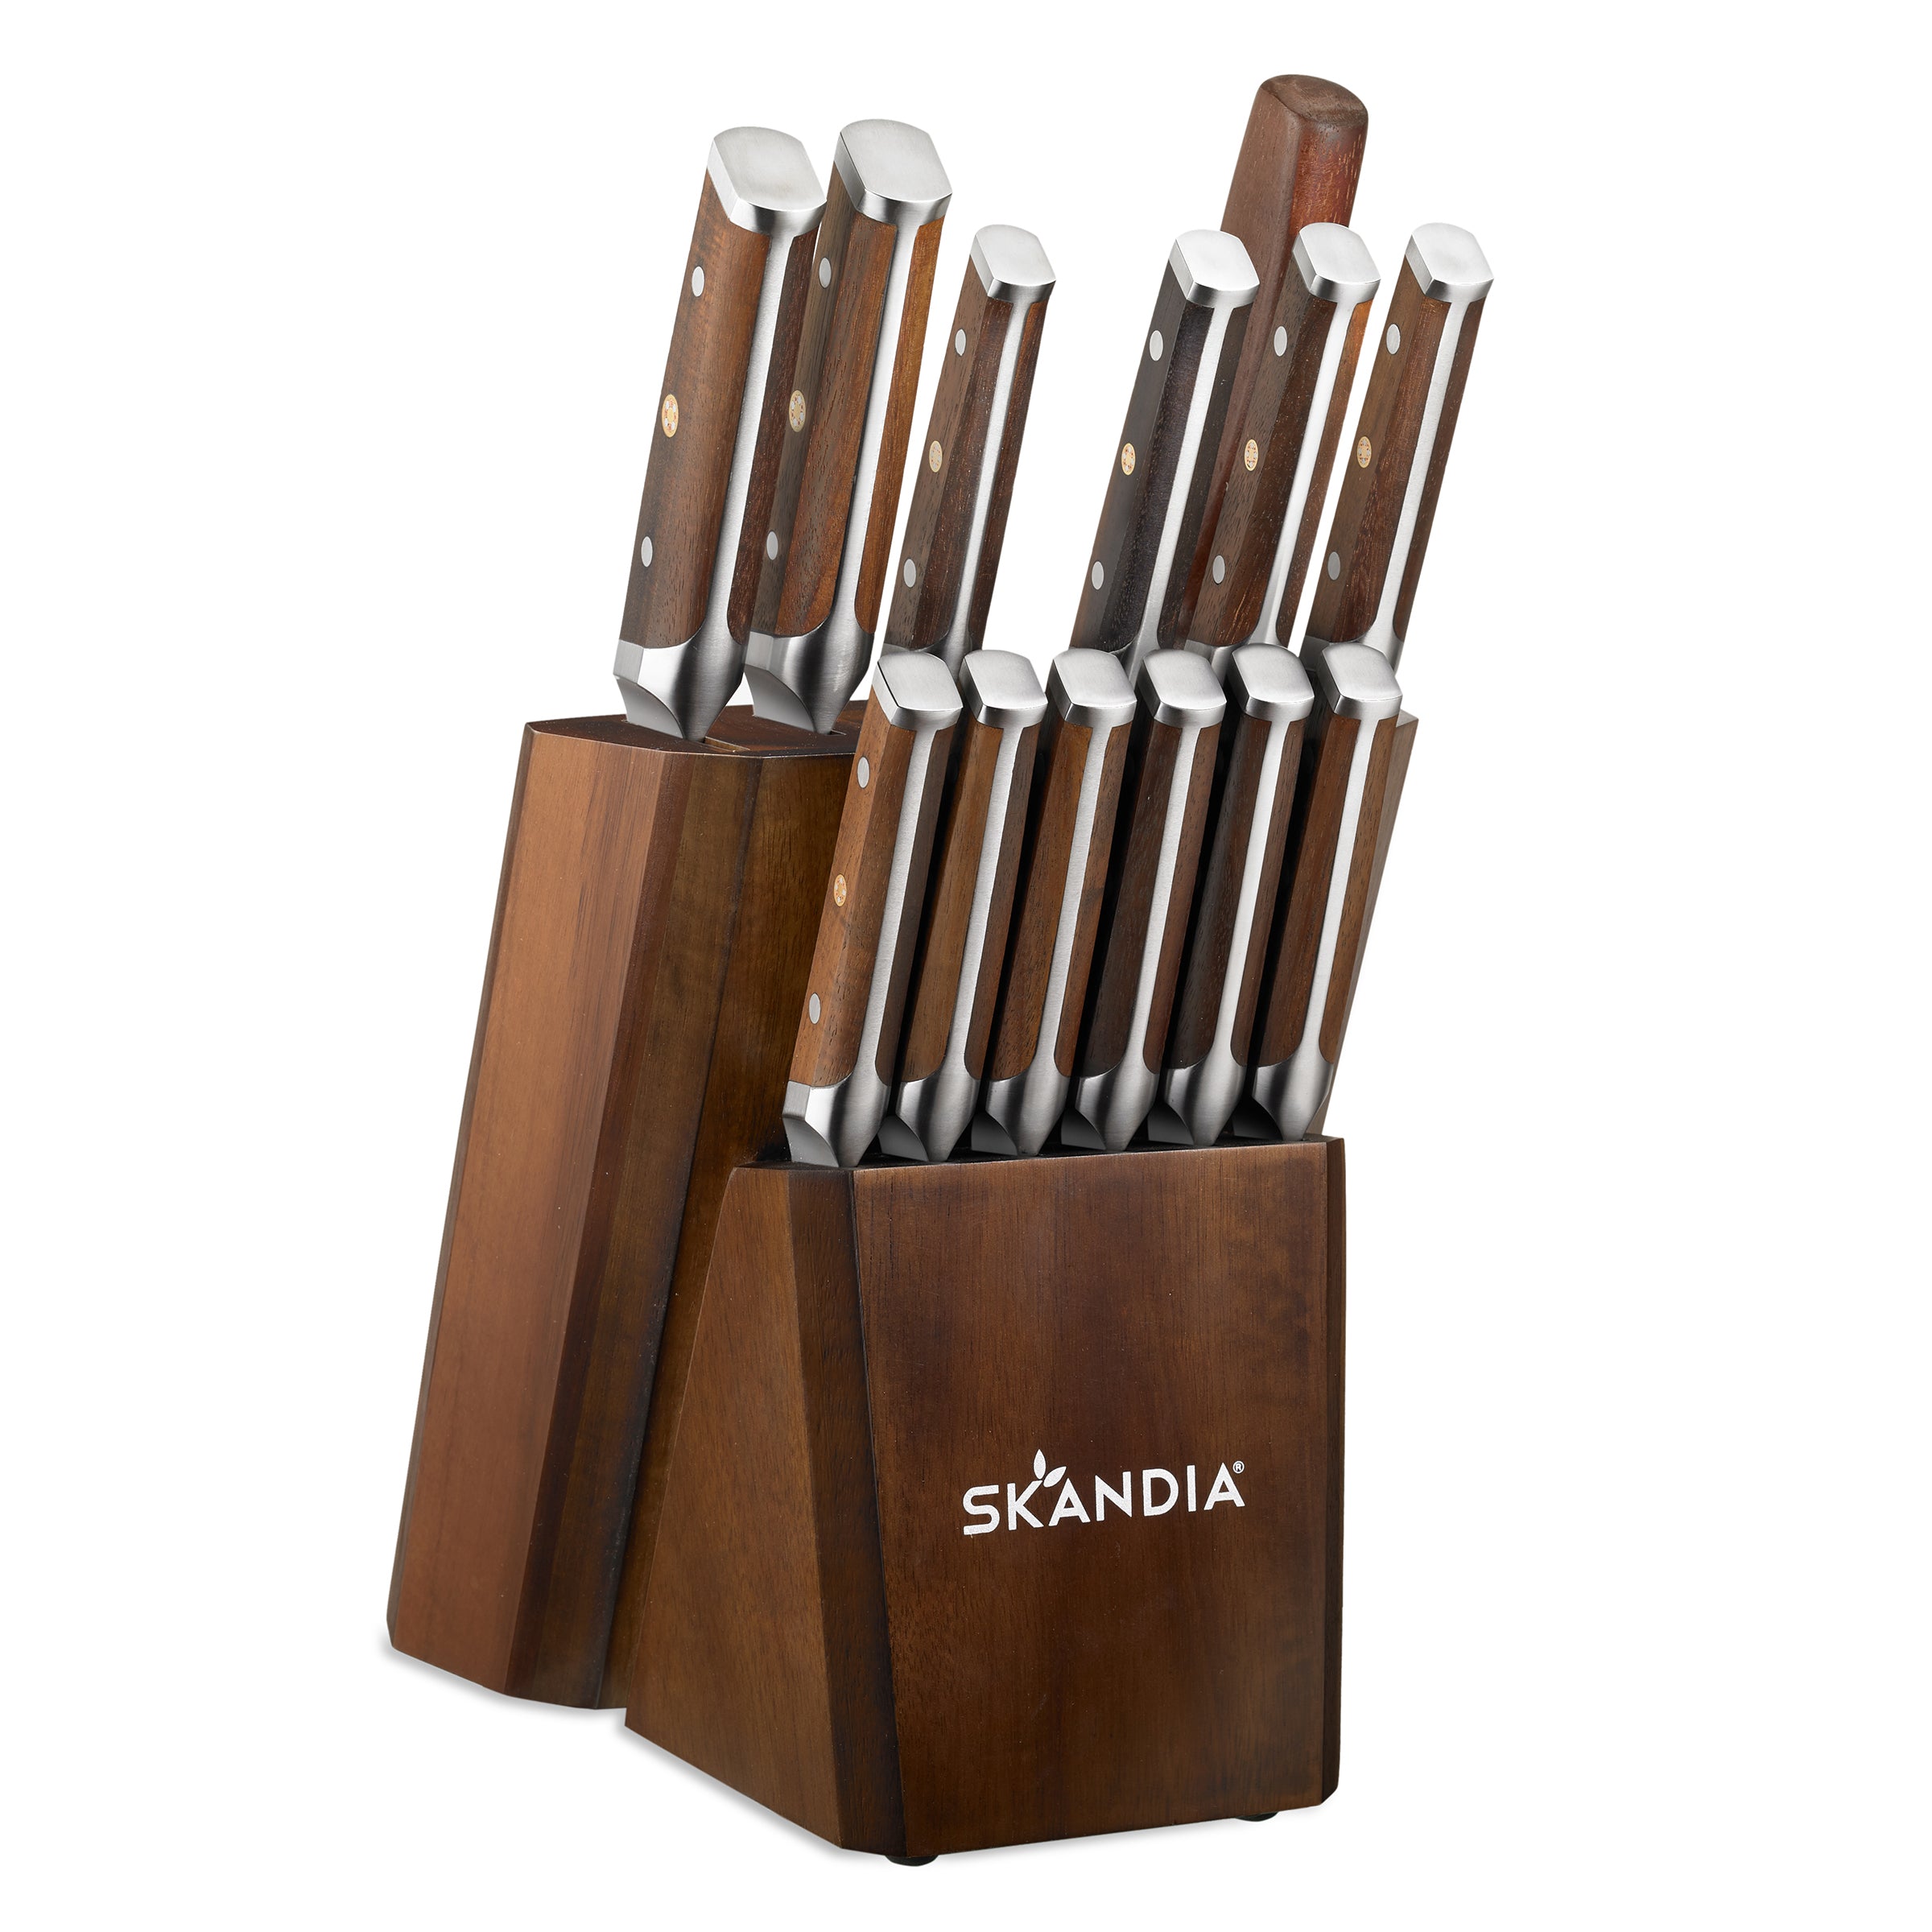 Cream Stainless Steel Cutlery Set w/Acacia Wood Block - 14 Pc by